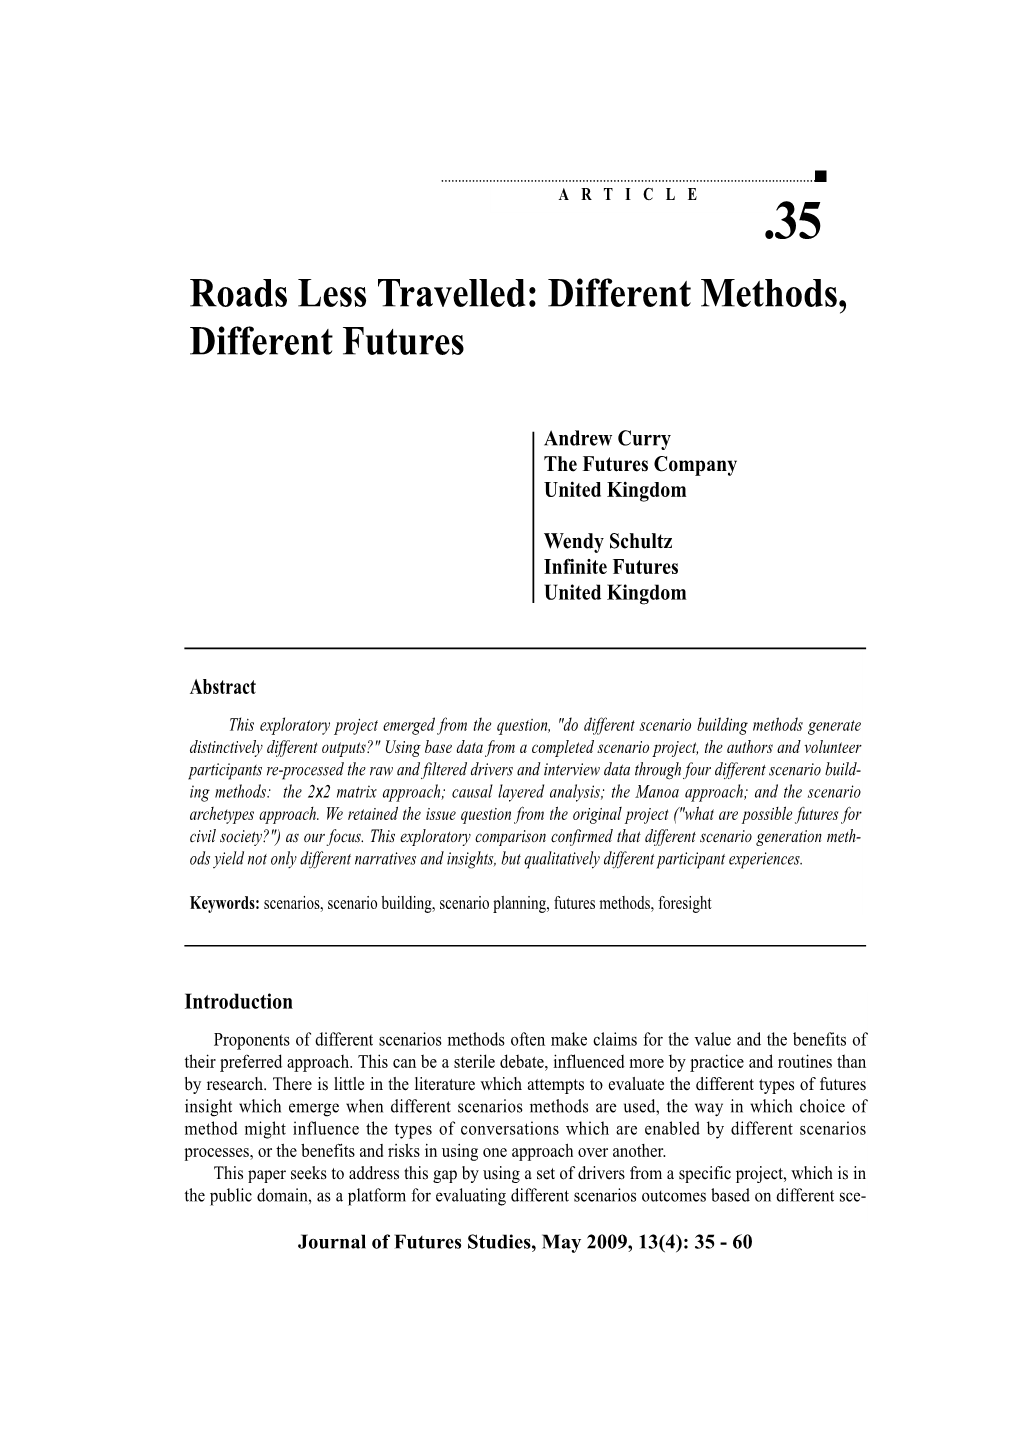 Roads Less Travelled: Different Methods, Different Futures